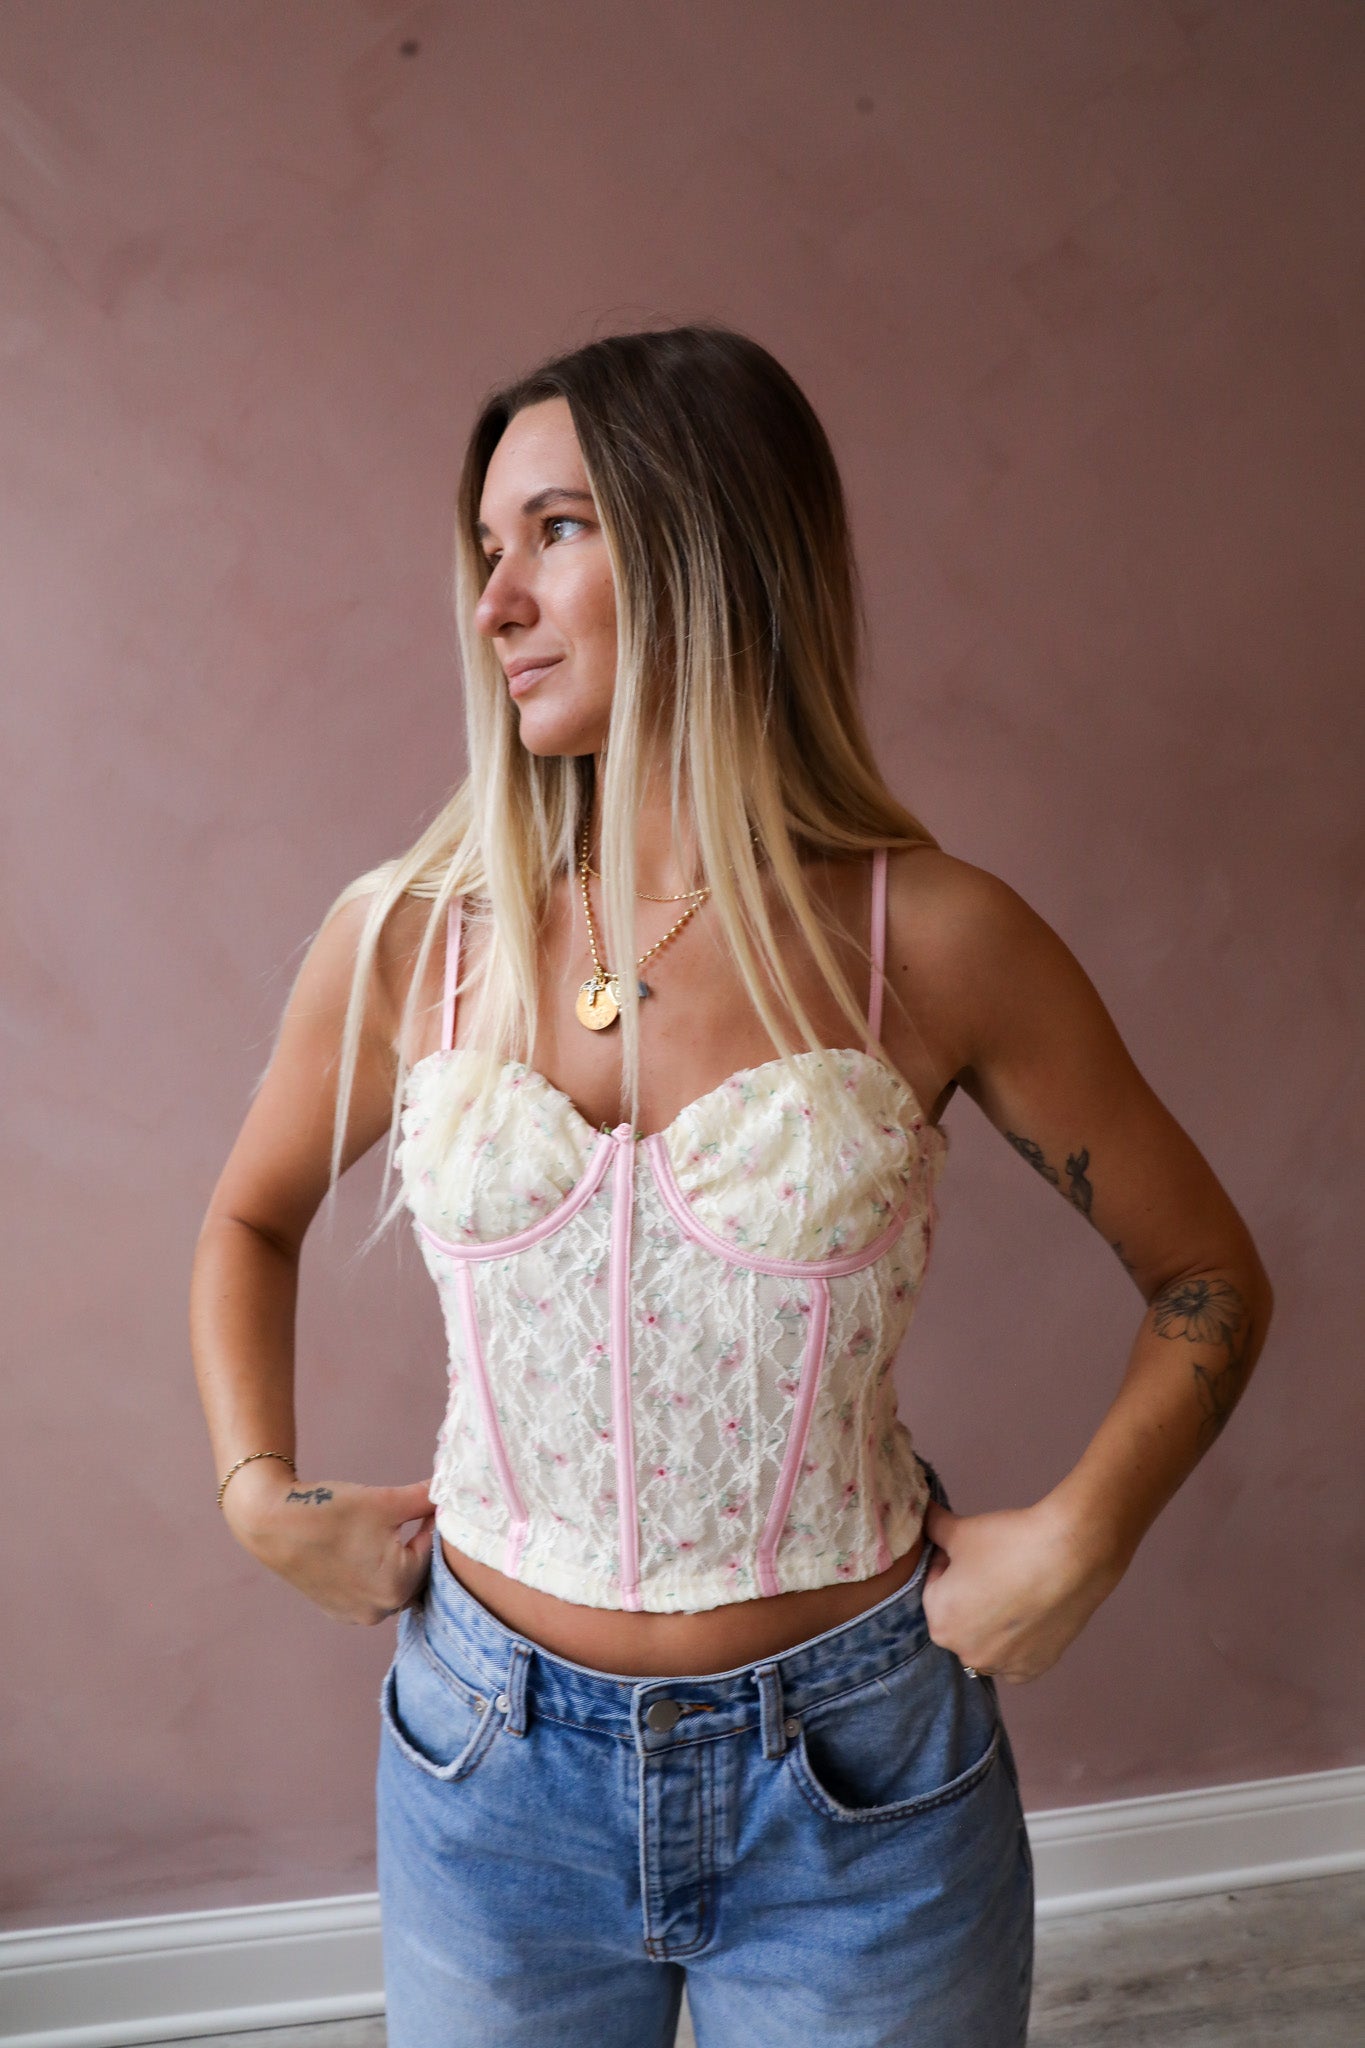 A lace fabric with contrast piping detail adorns this garment, featuring adjustable spaghetti straps and a convenient zipper closure. The piece is fully lined, adding to its practicality and elegance.